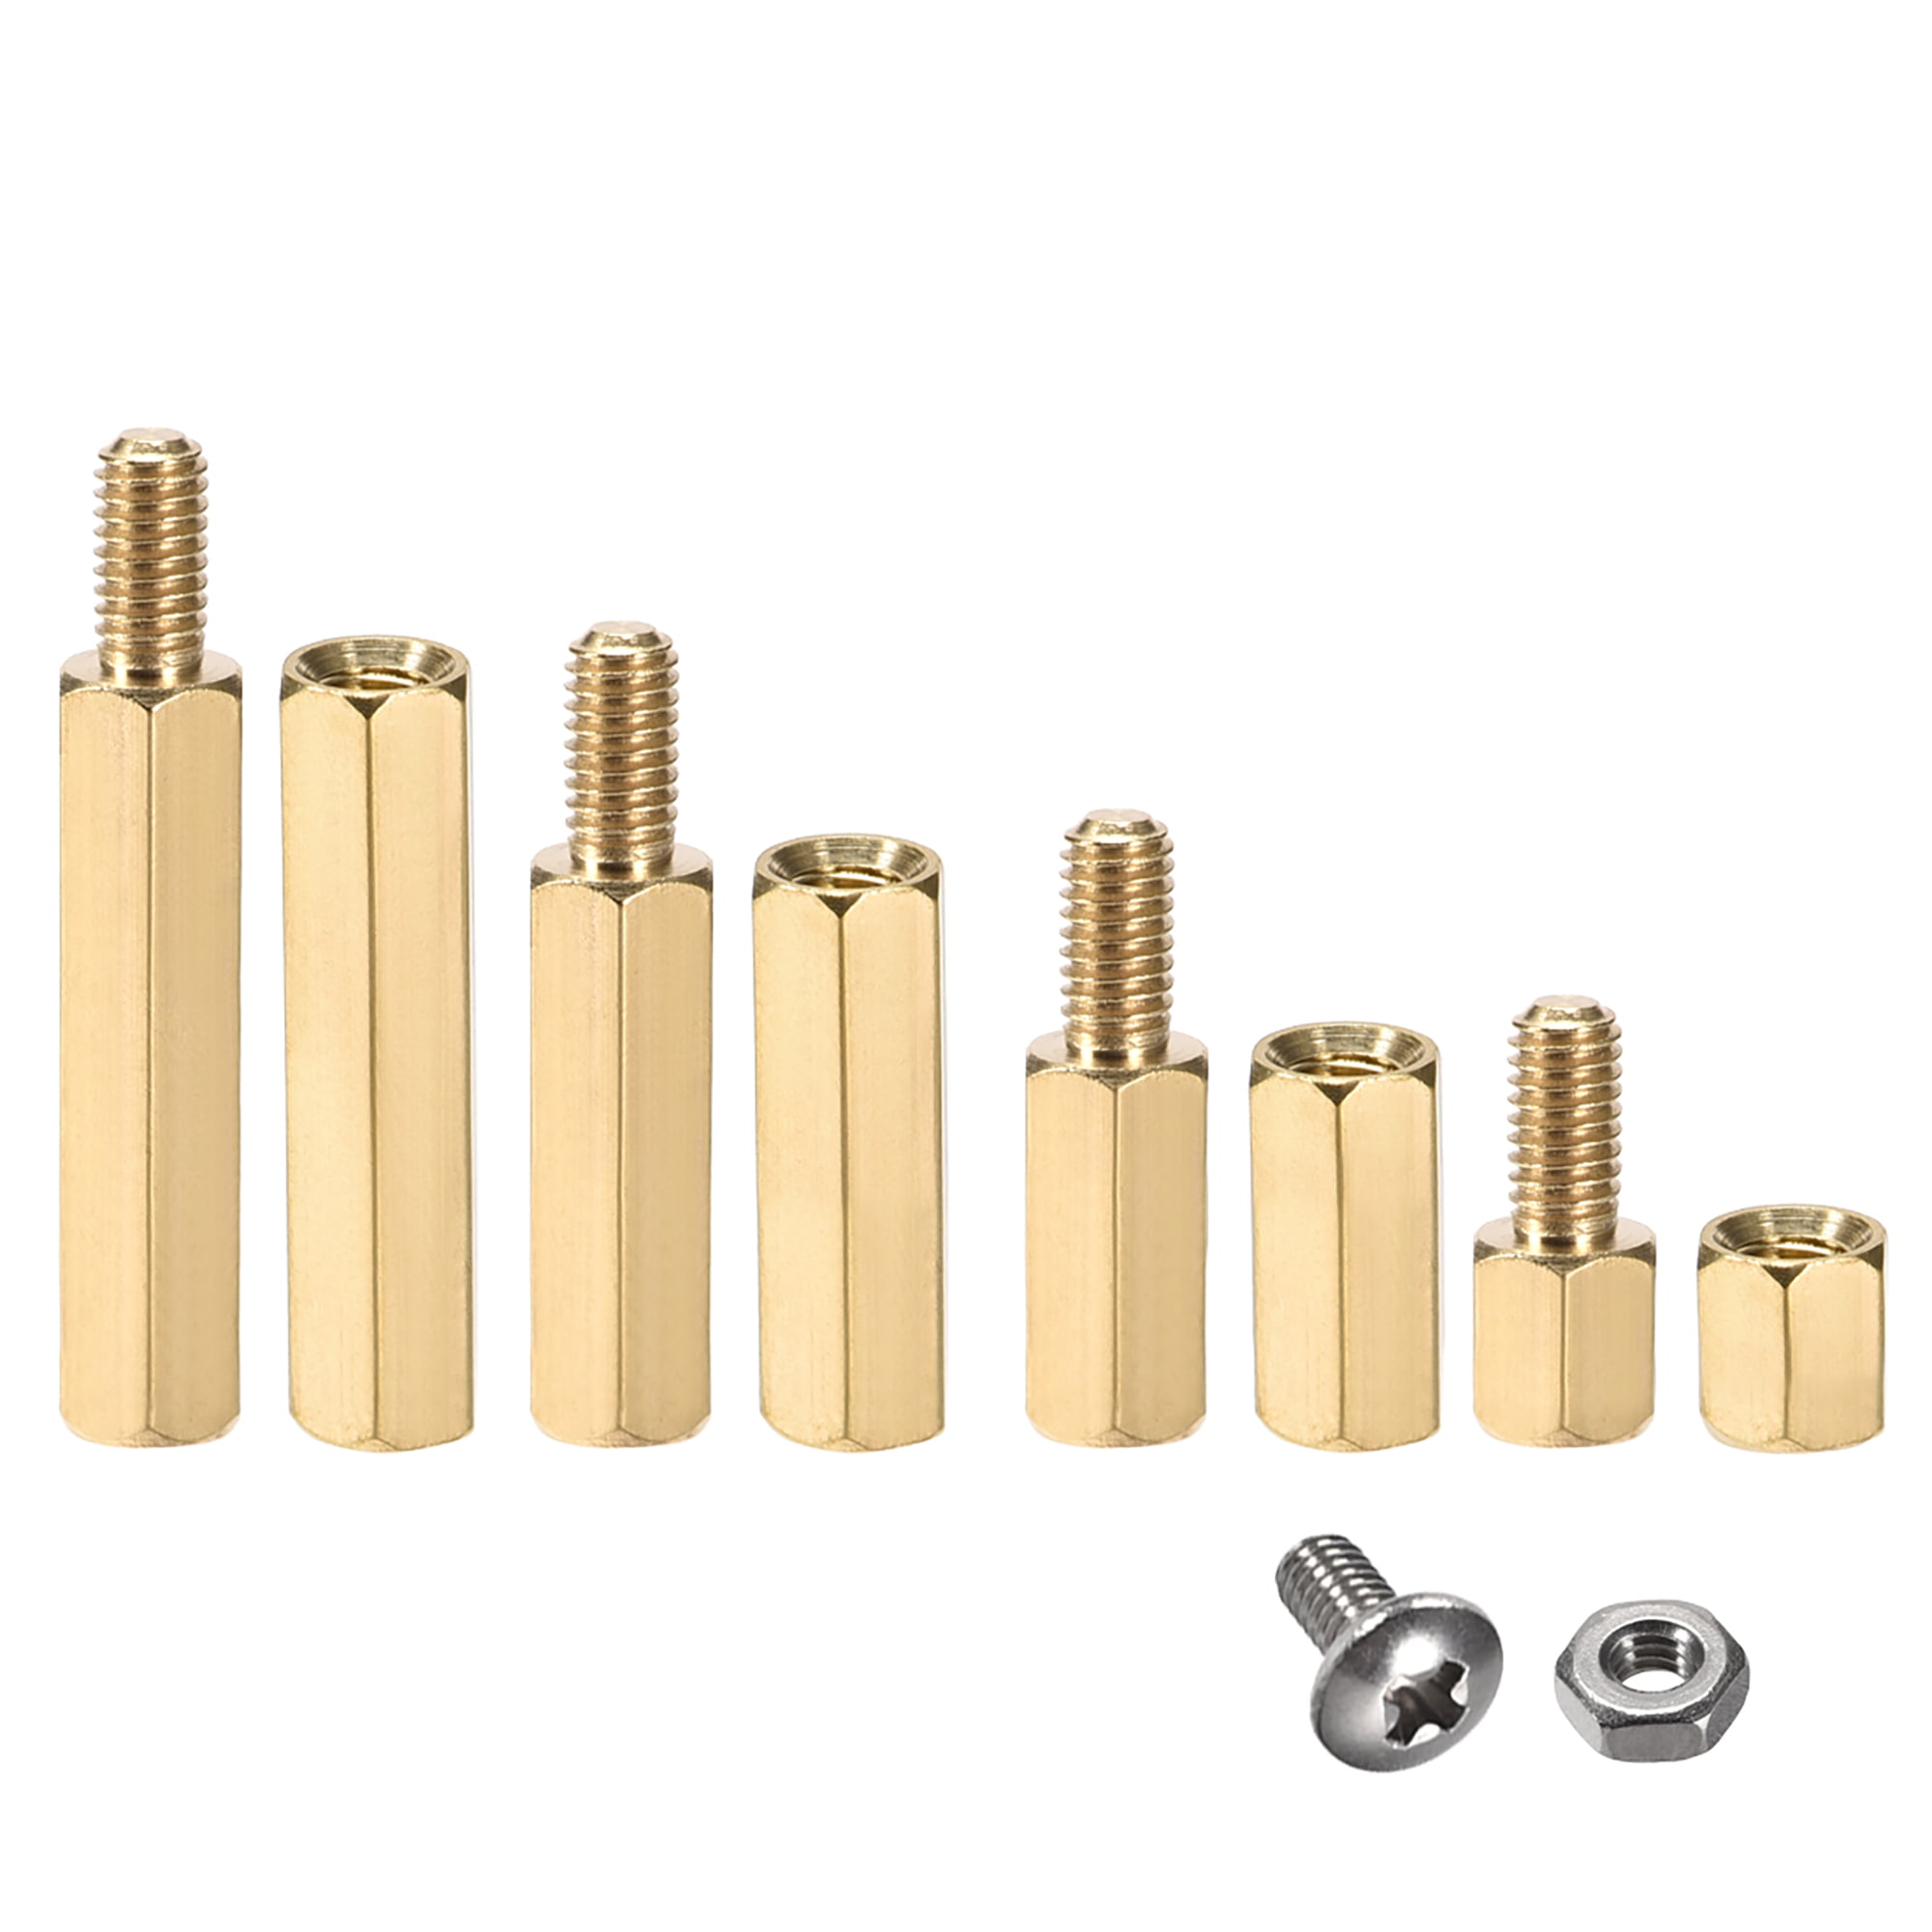 10 pieces Standoffs & Spacers M3 x 10mm CIRCULAR CLEARANCE SPACER 